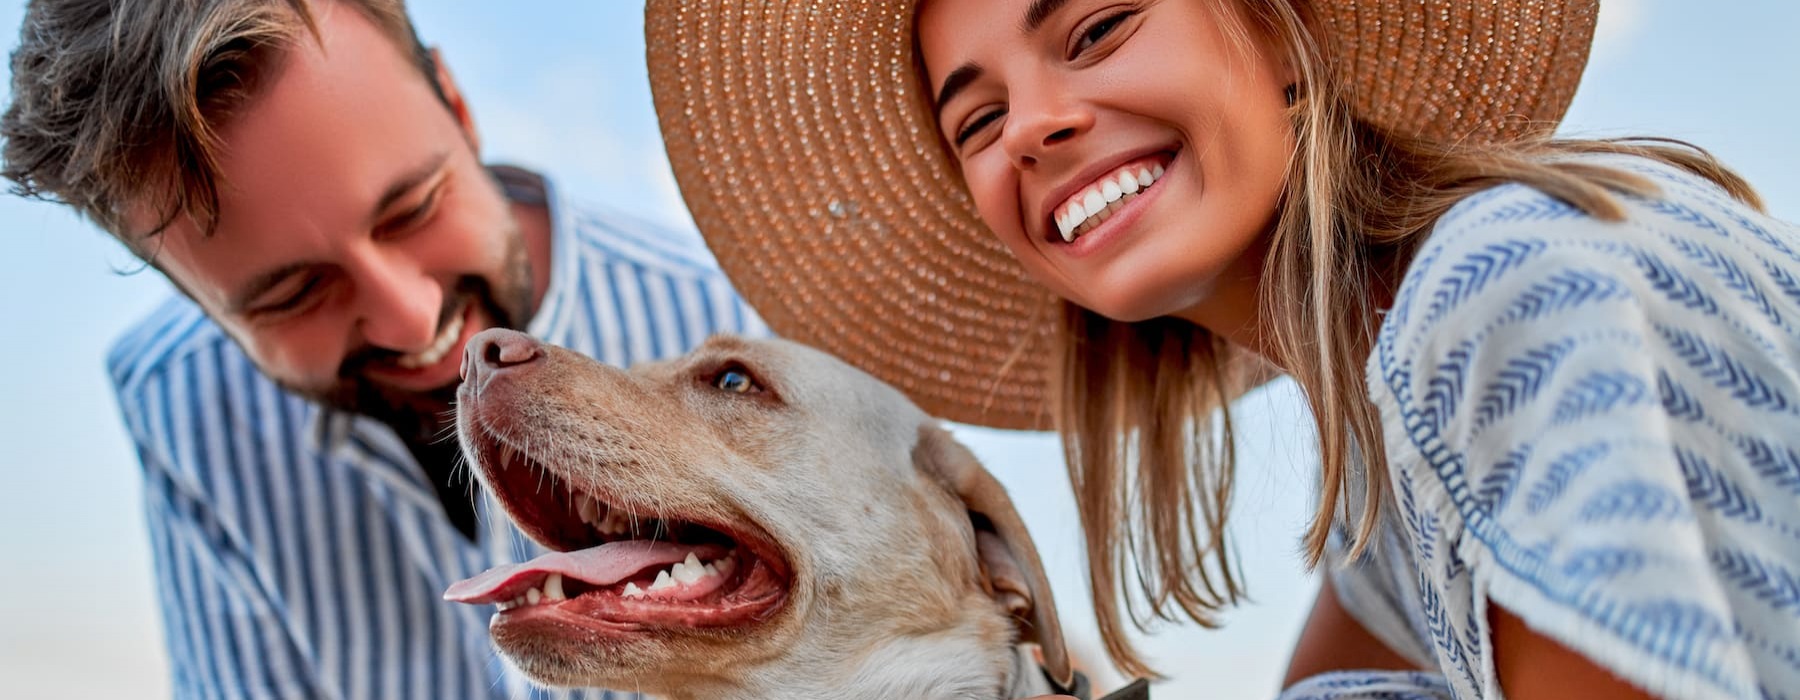 lifestyle image of a couple smiling on a beach with their dog